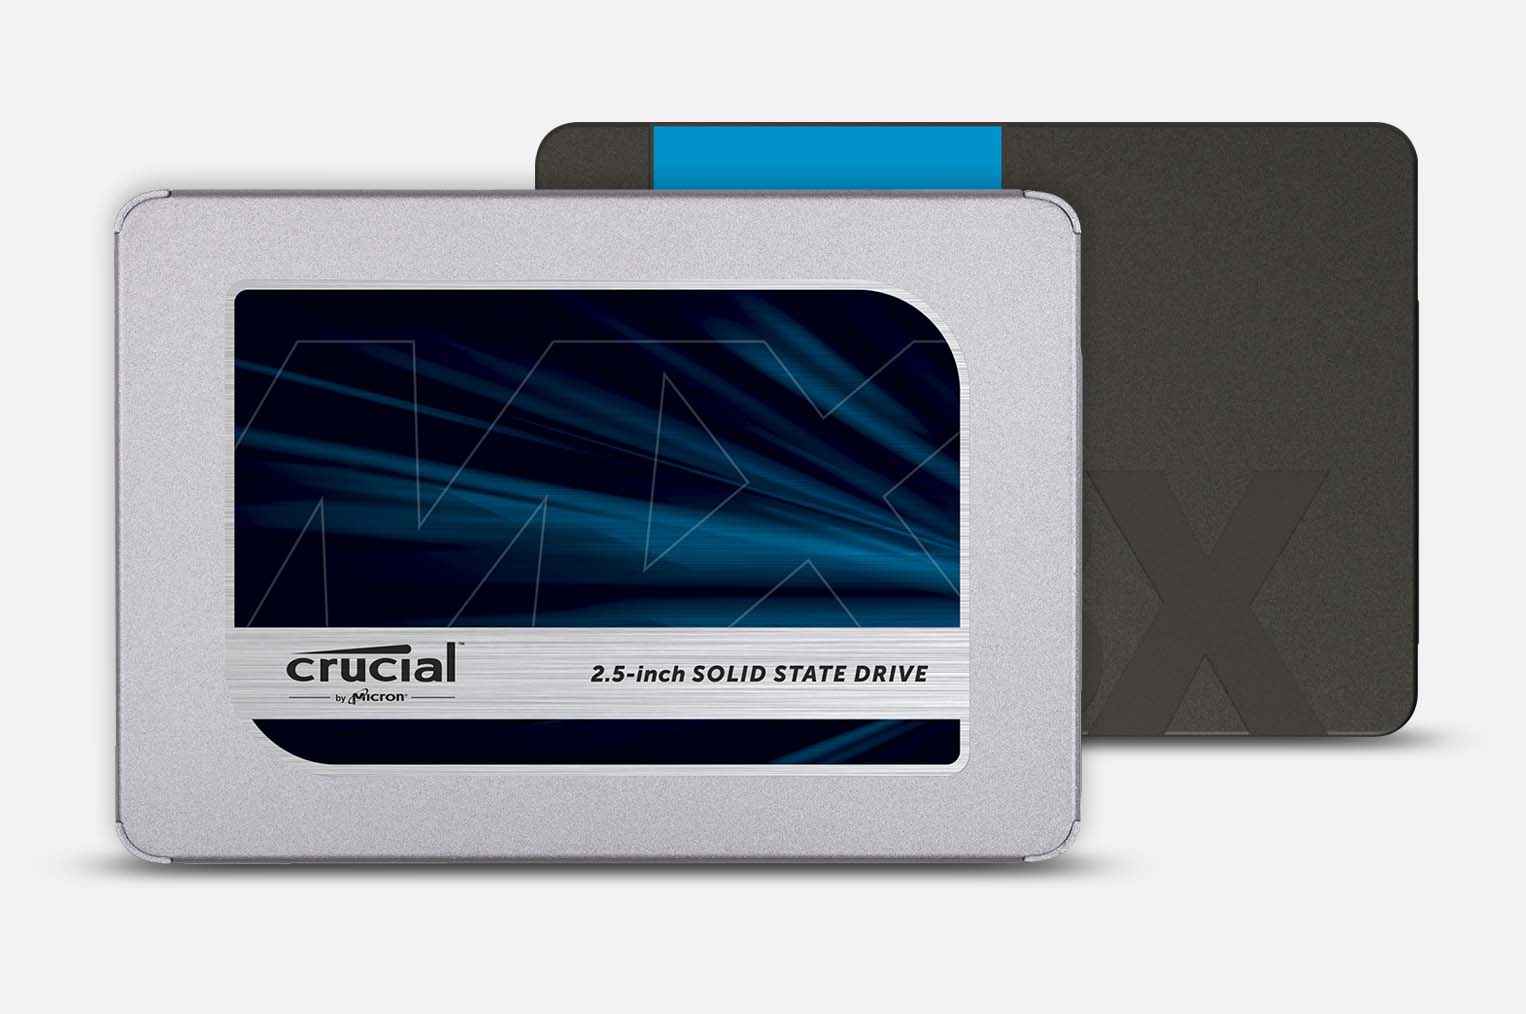 Crucial SATA SSD line-up